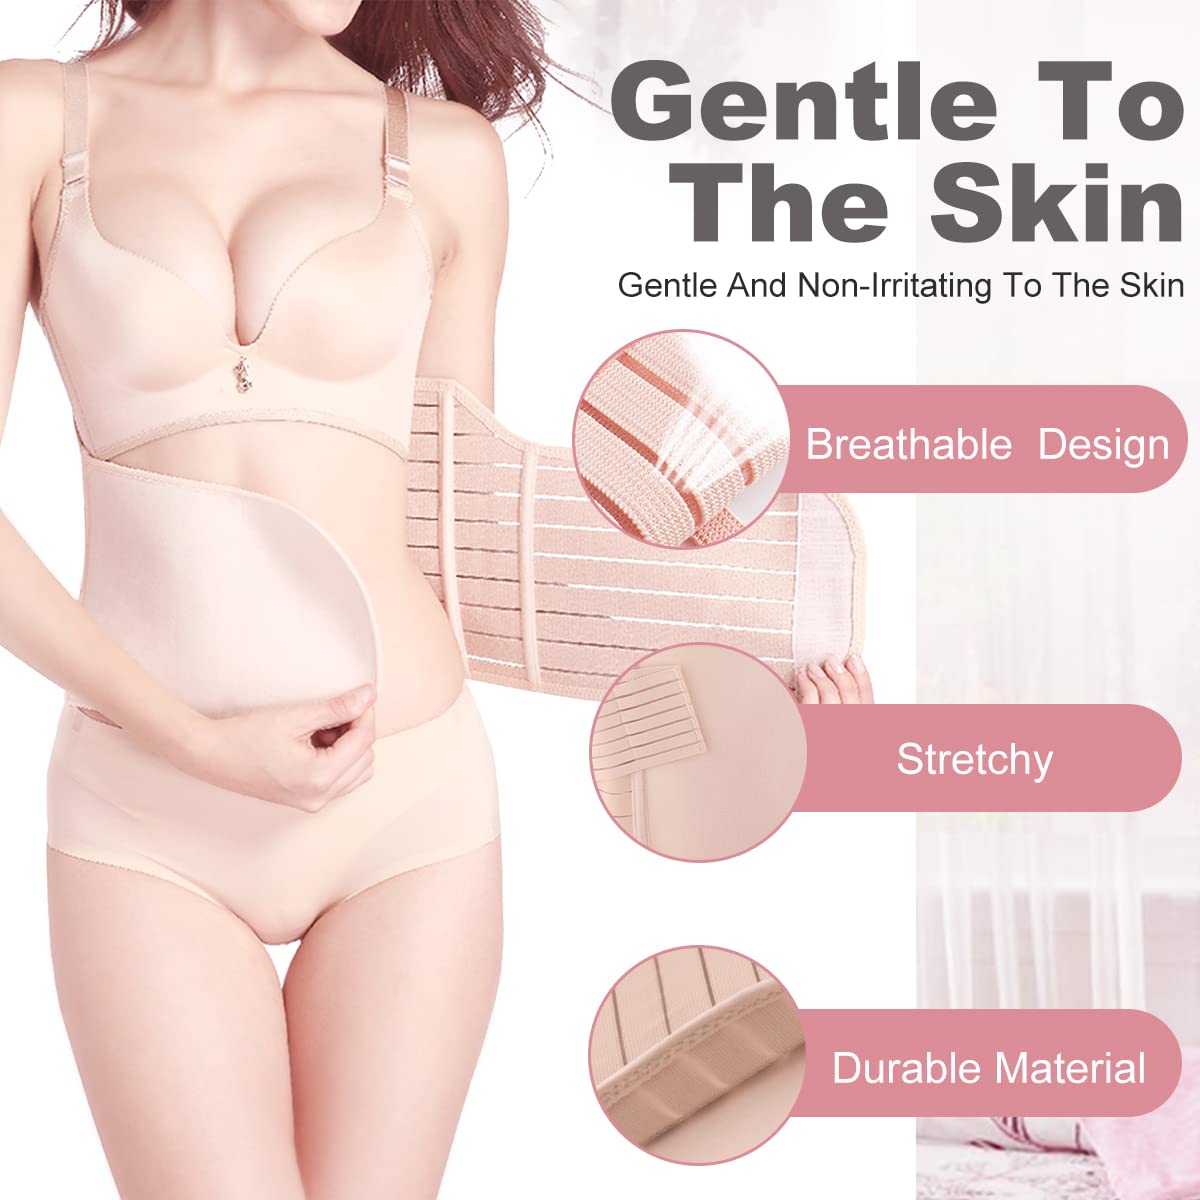 Hip Mall 3 In 1 Postpartum Belly Band Wrap - Abdominal Binder Post Surgery C Section Compression Girdle Belt - After Birth Recovery Support - Postnatal Pelvis Waist Trainer Slimming Shapewear Body Shaper